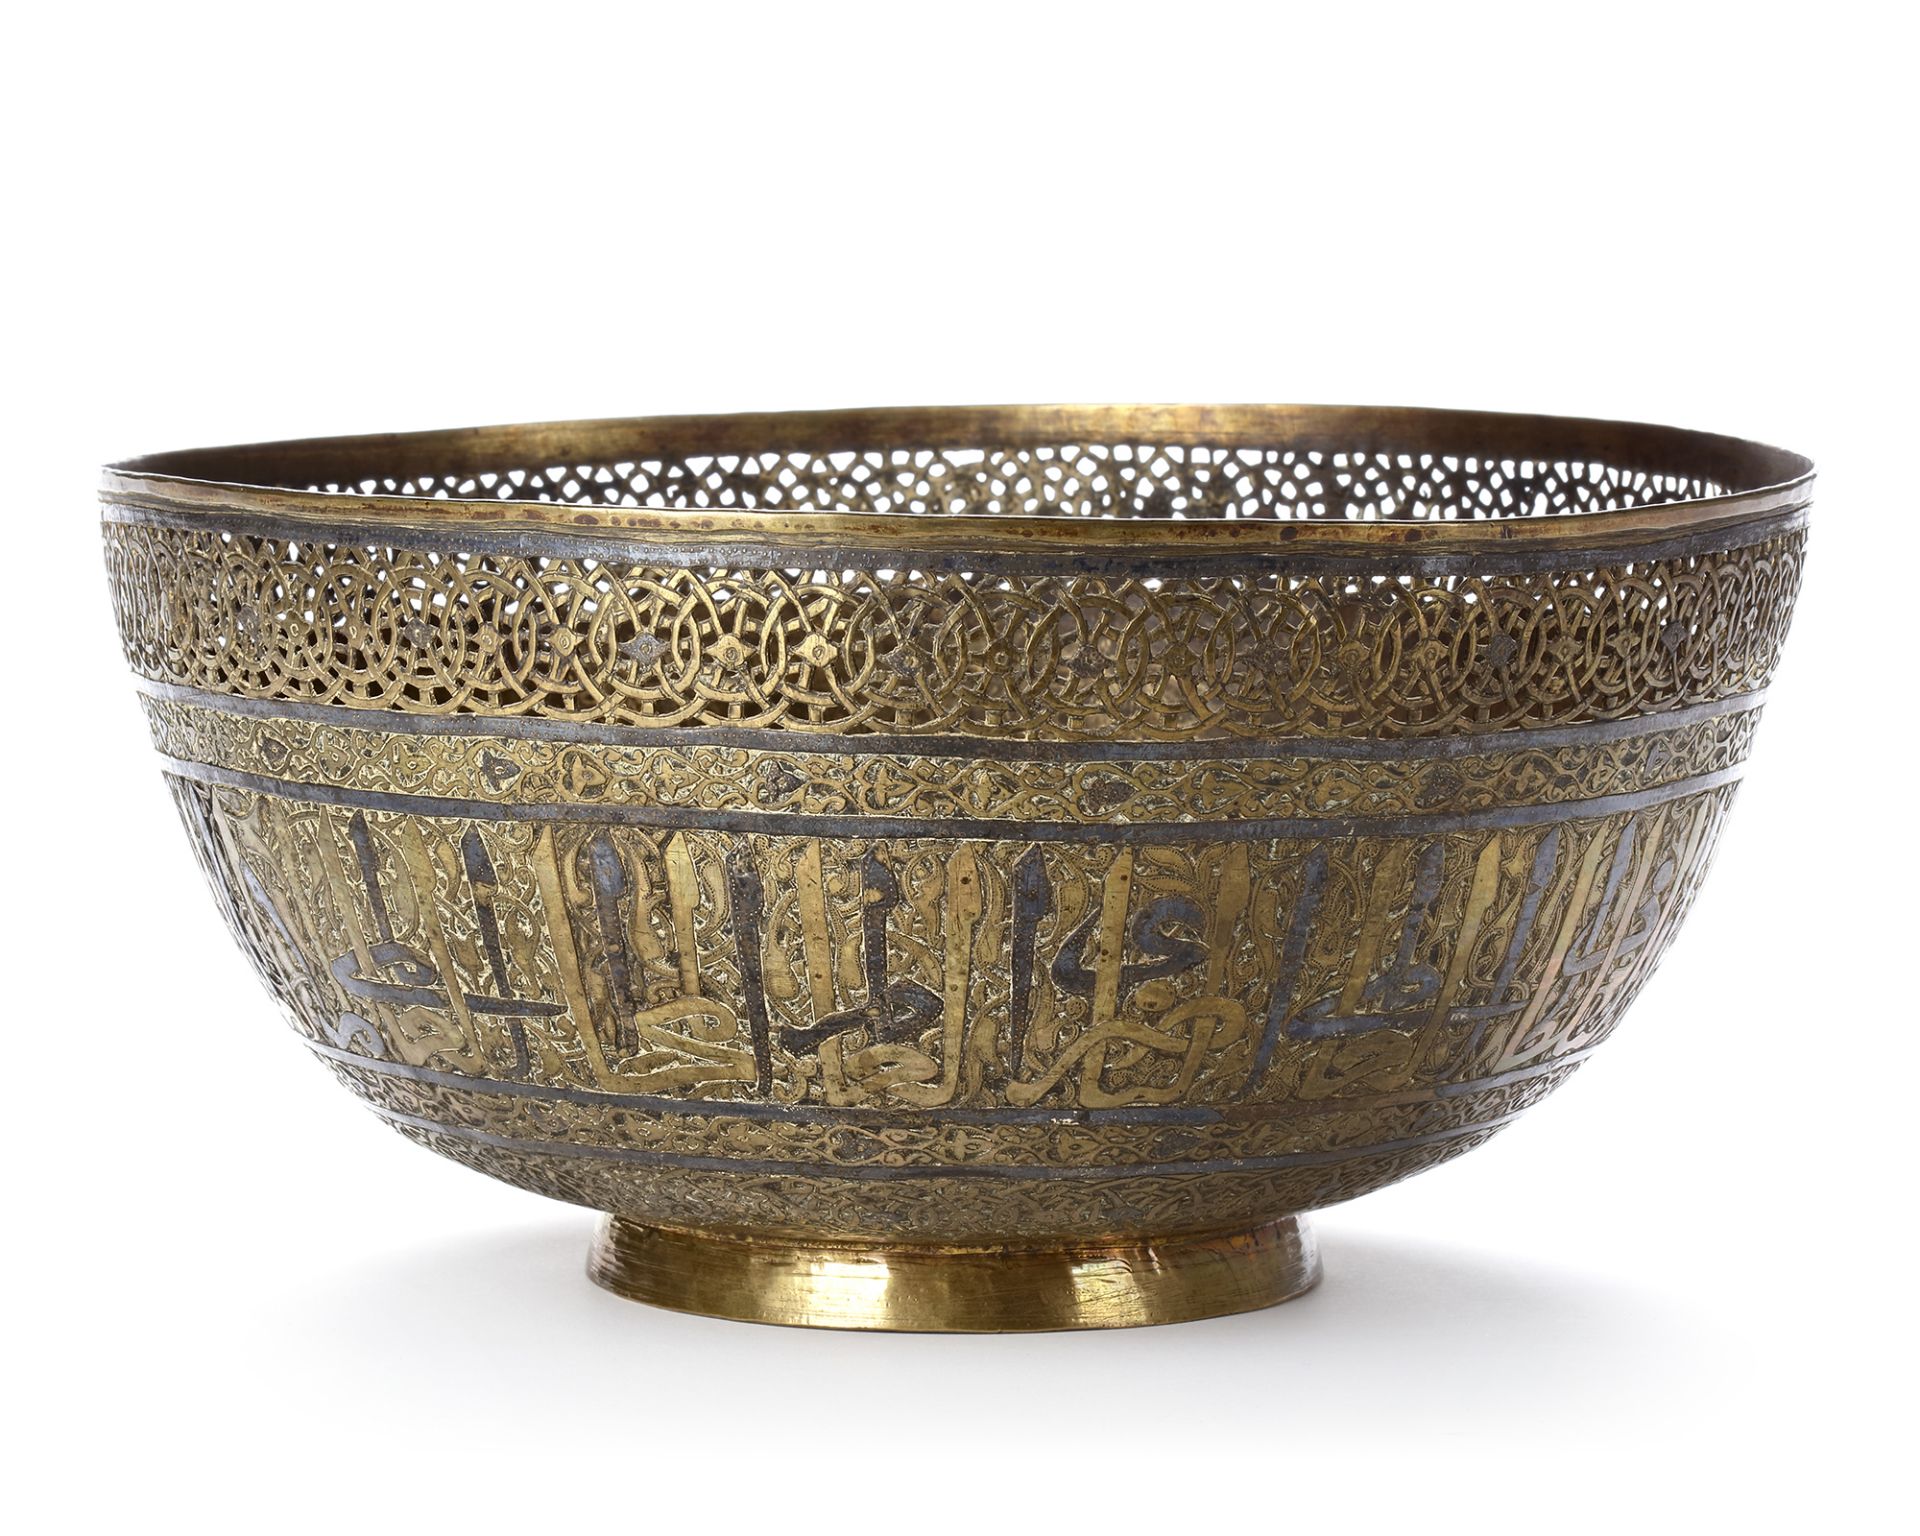 AN ISLAMIC BRASS BOWL WITH INSCRIPTIONS, 19TH CENTURY